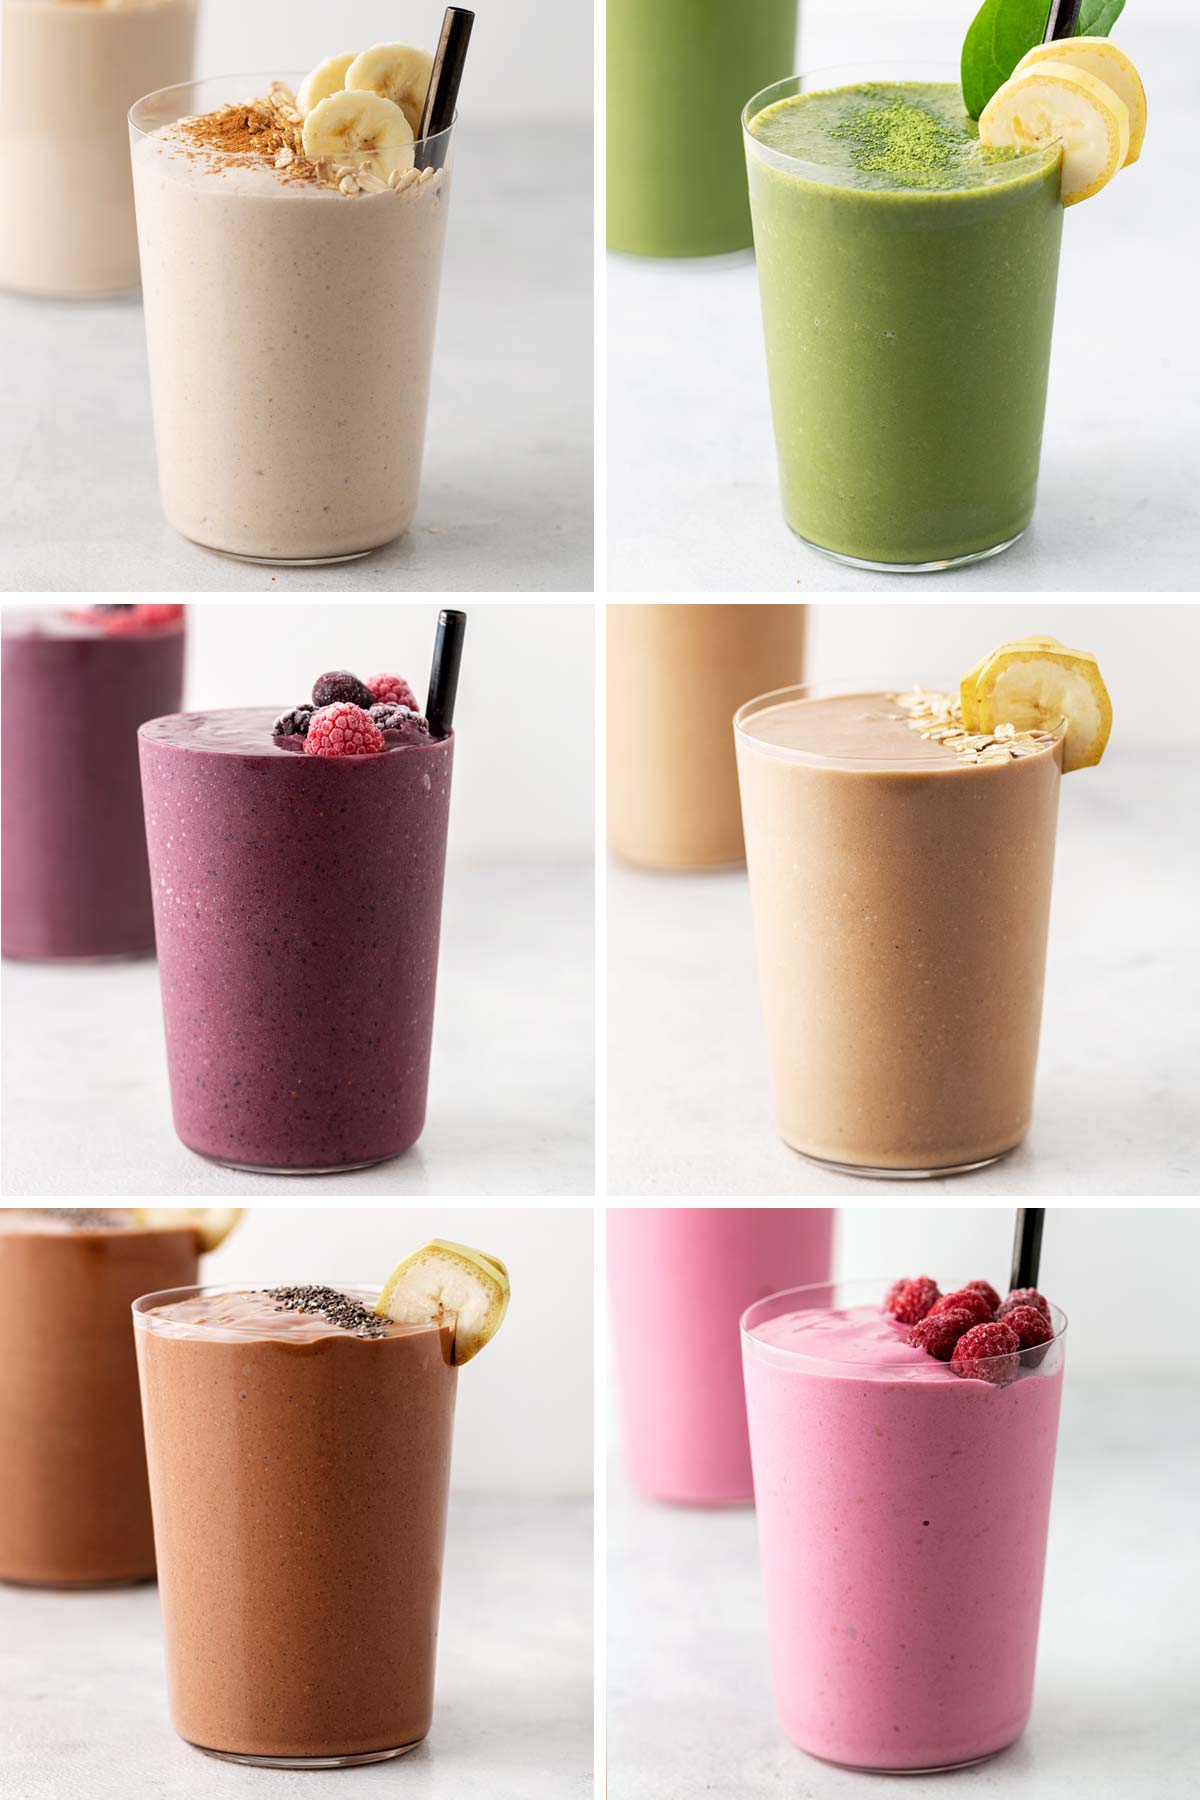 Six different smoothies.